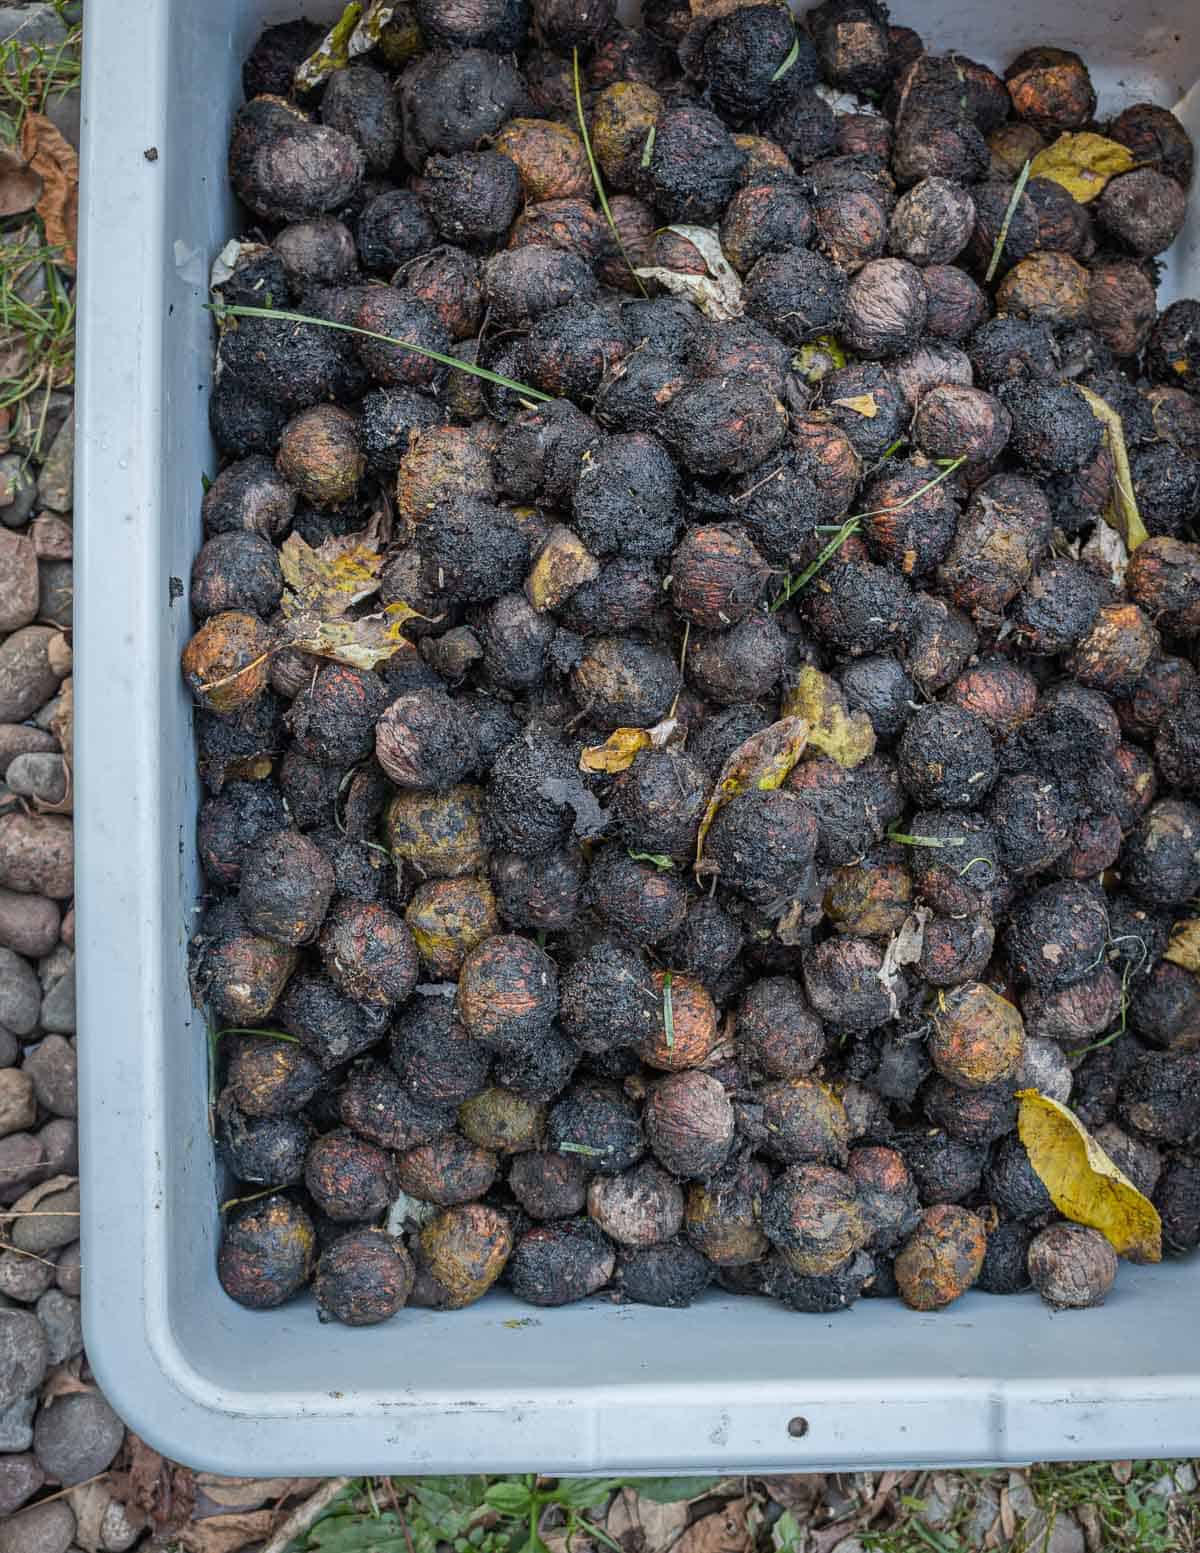 Dirty black walnuts, freshly harvested, ready to be washed